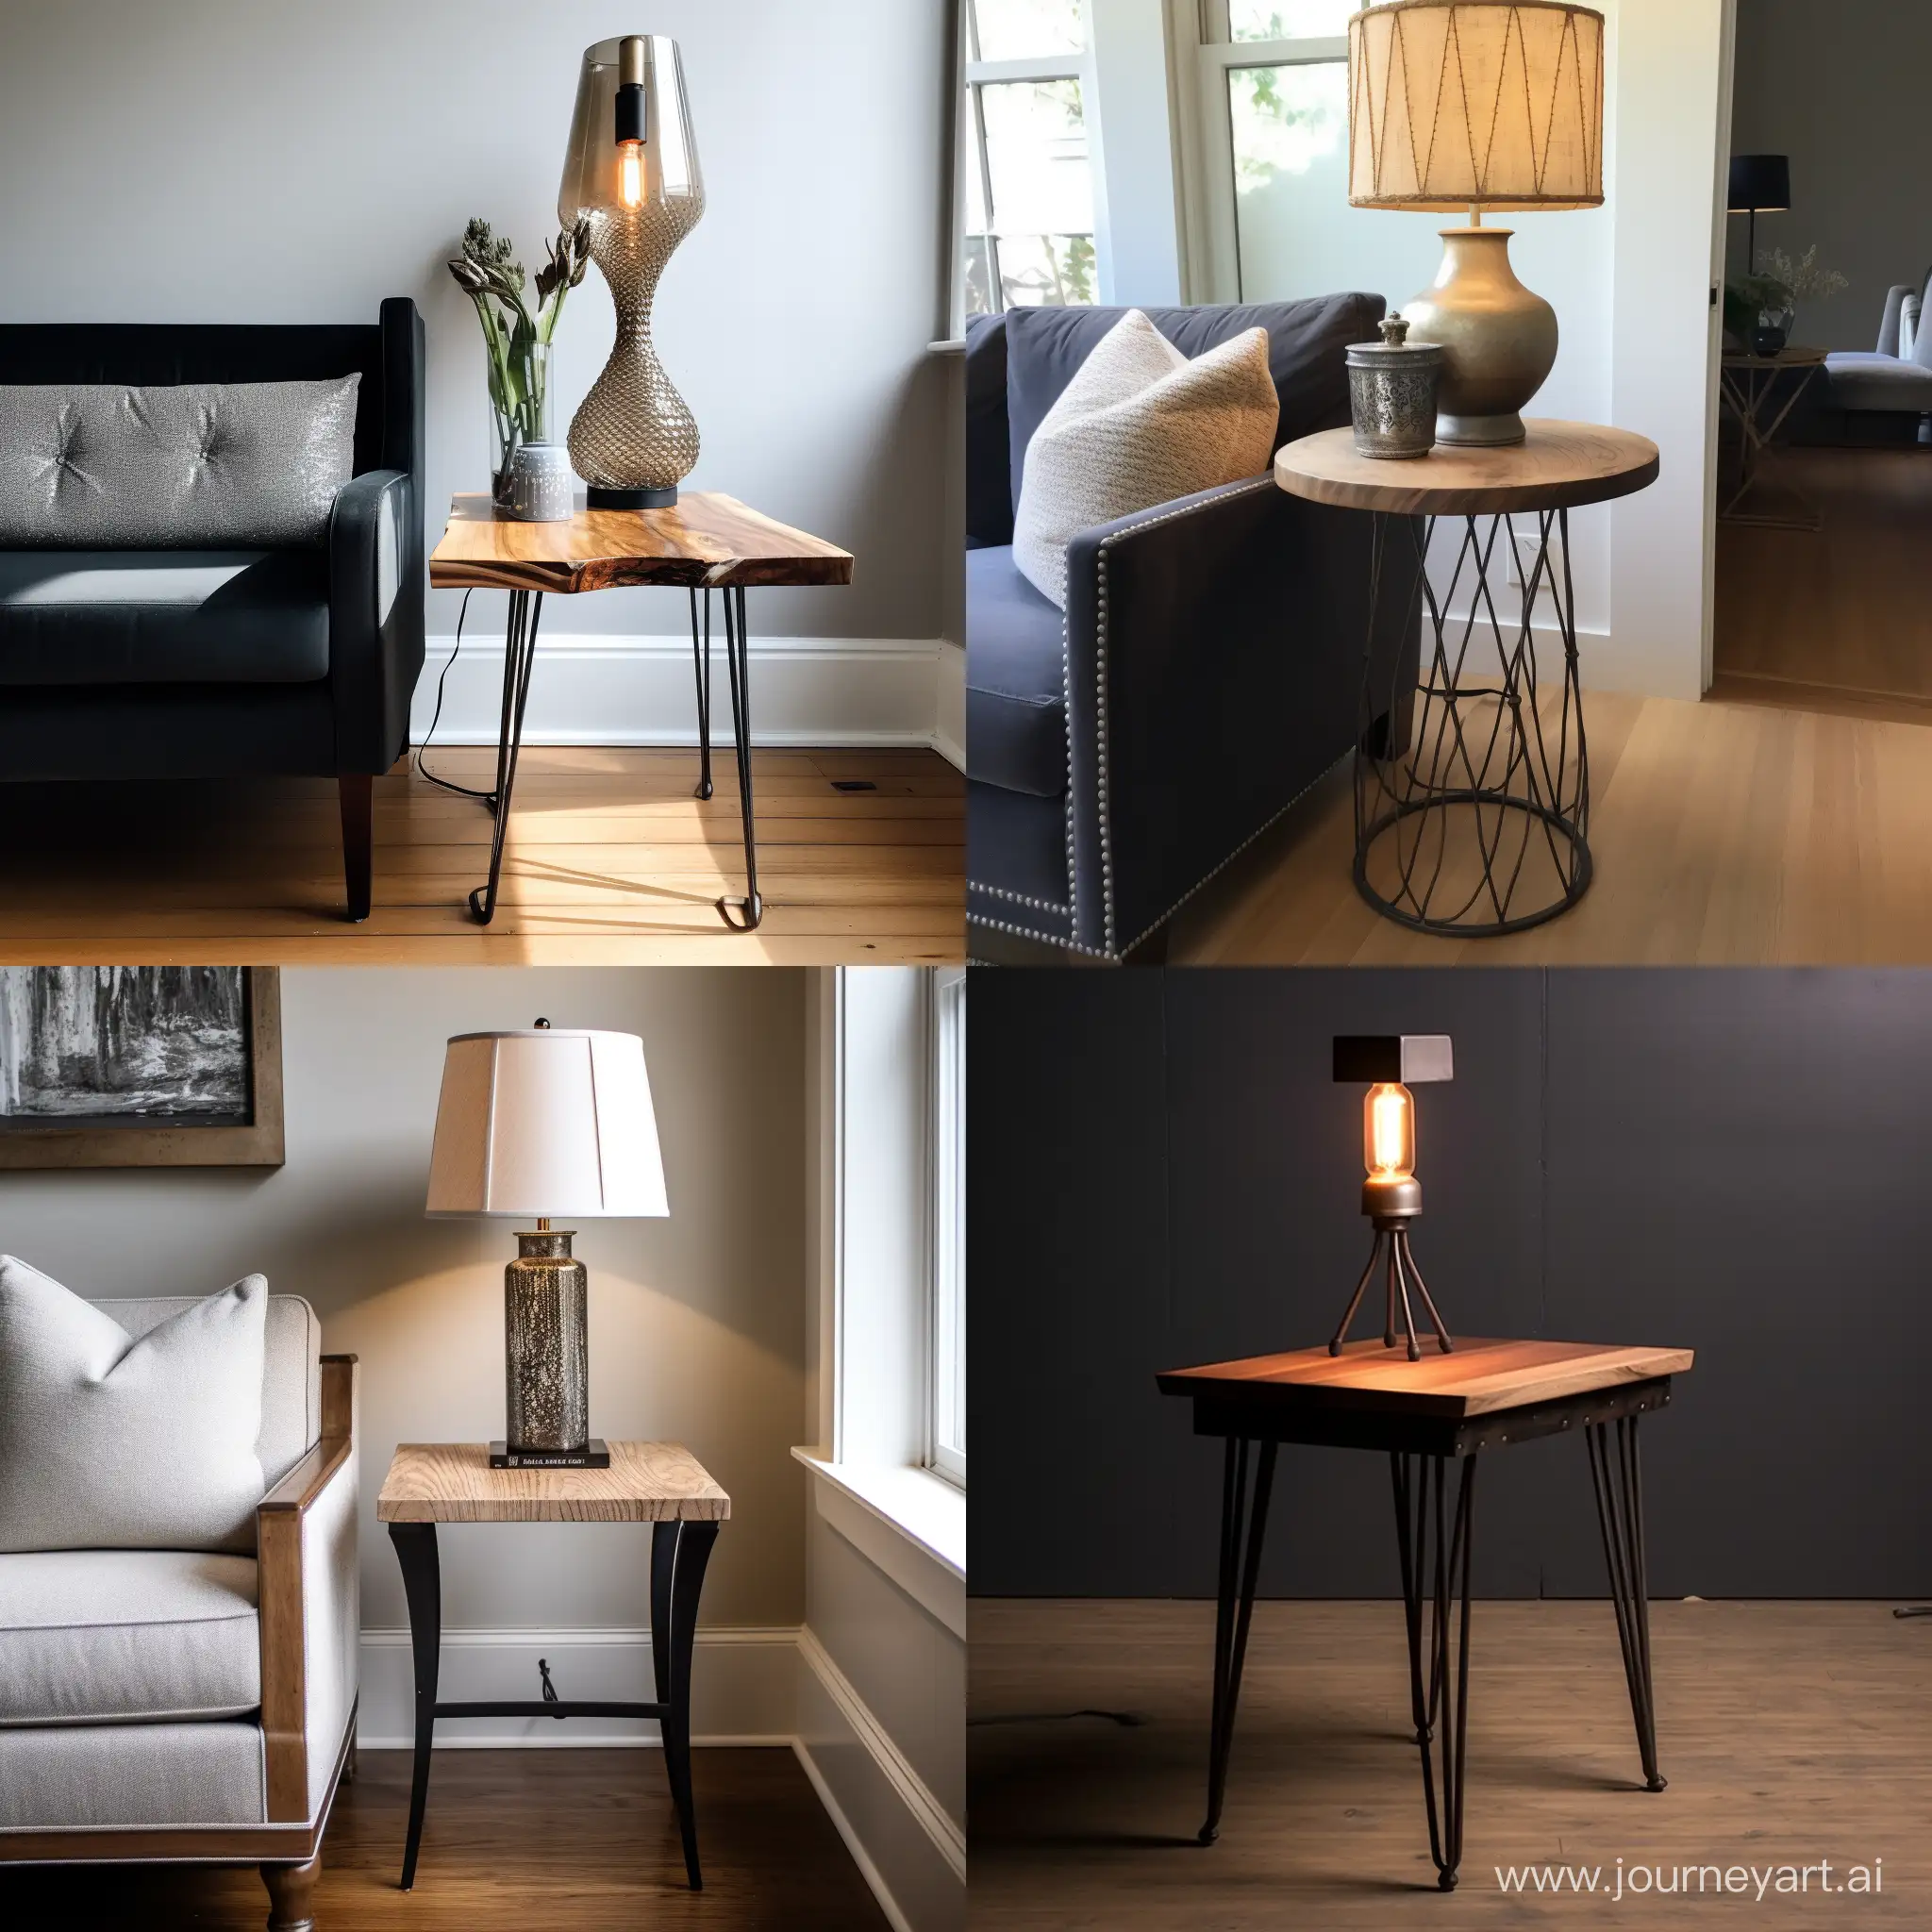 end table with wood top and black beaded legs. studio lighting